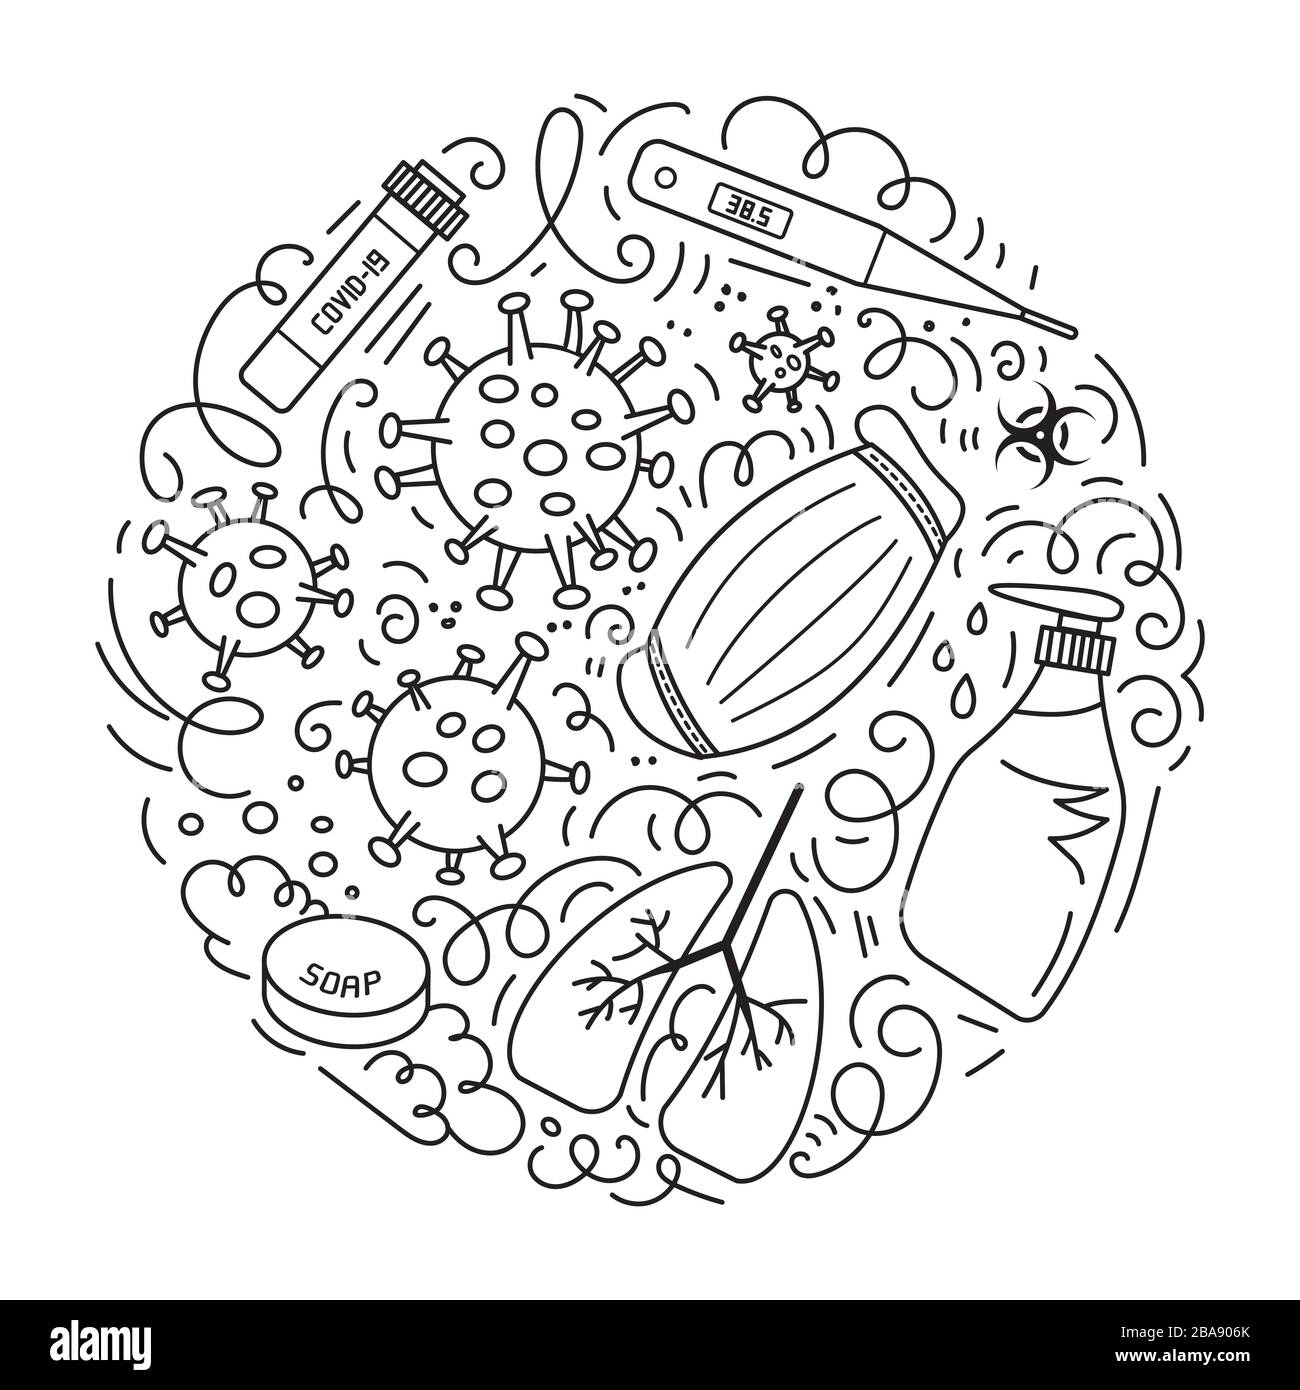 Novel Coronavirus 2019-nCoV vector doodles illustration. Round design with hand drawn elements such quarantine sign, respirator mask, blood test, hand sanitizer gel, thermometer, soap and more. Stock Vector